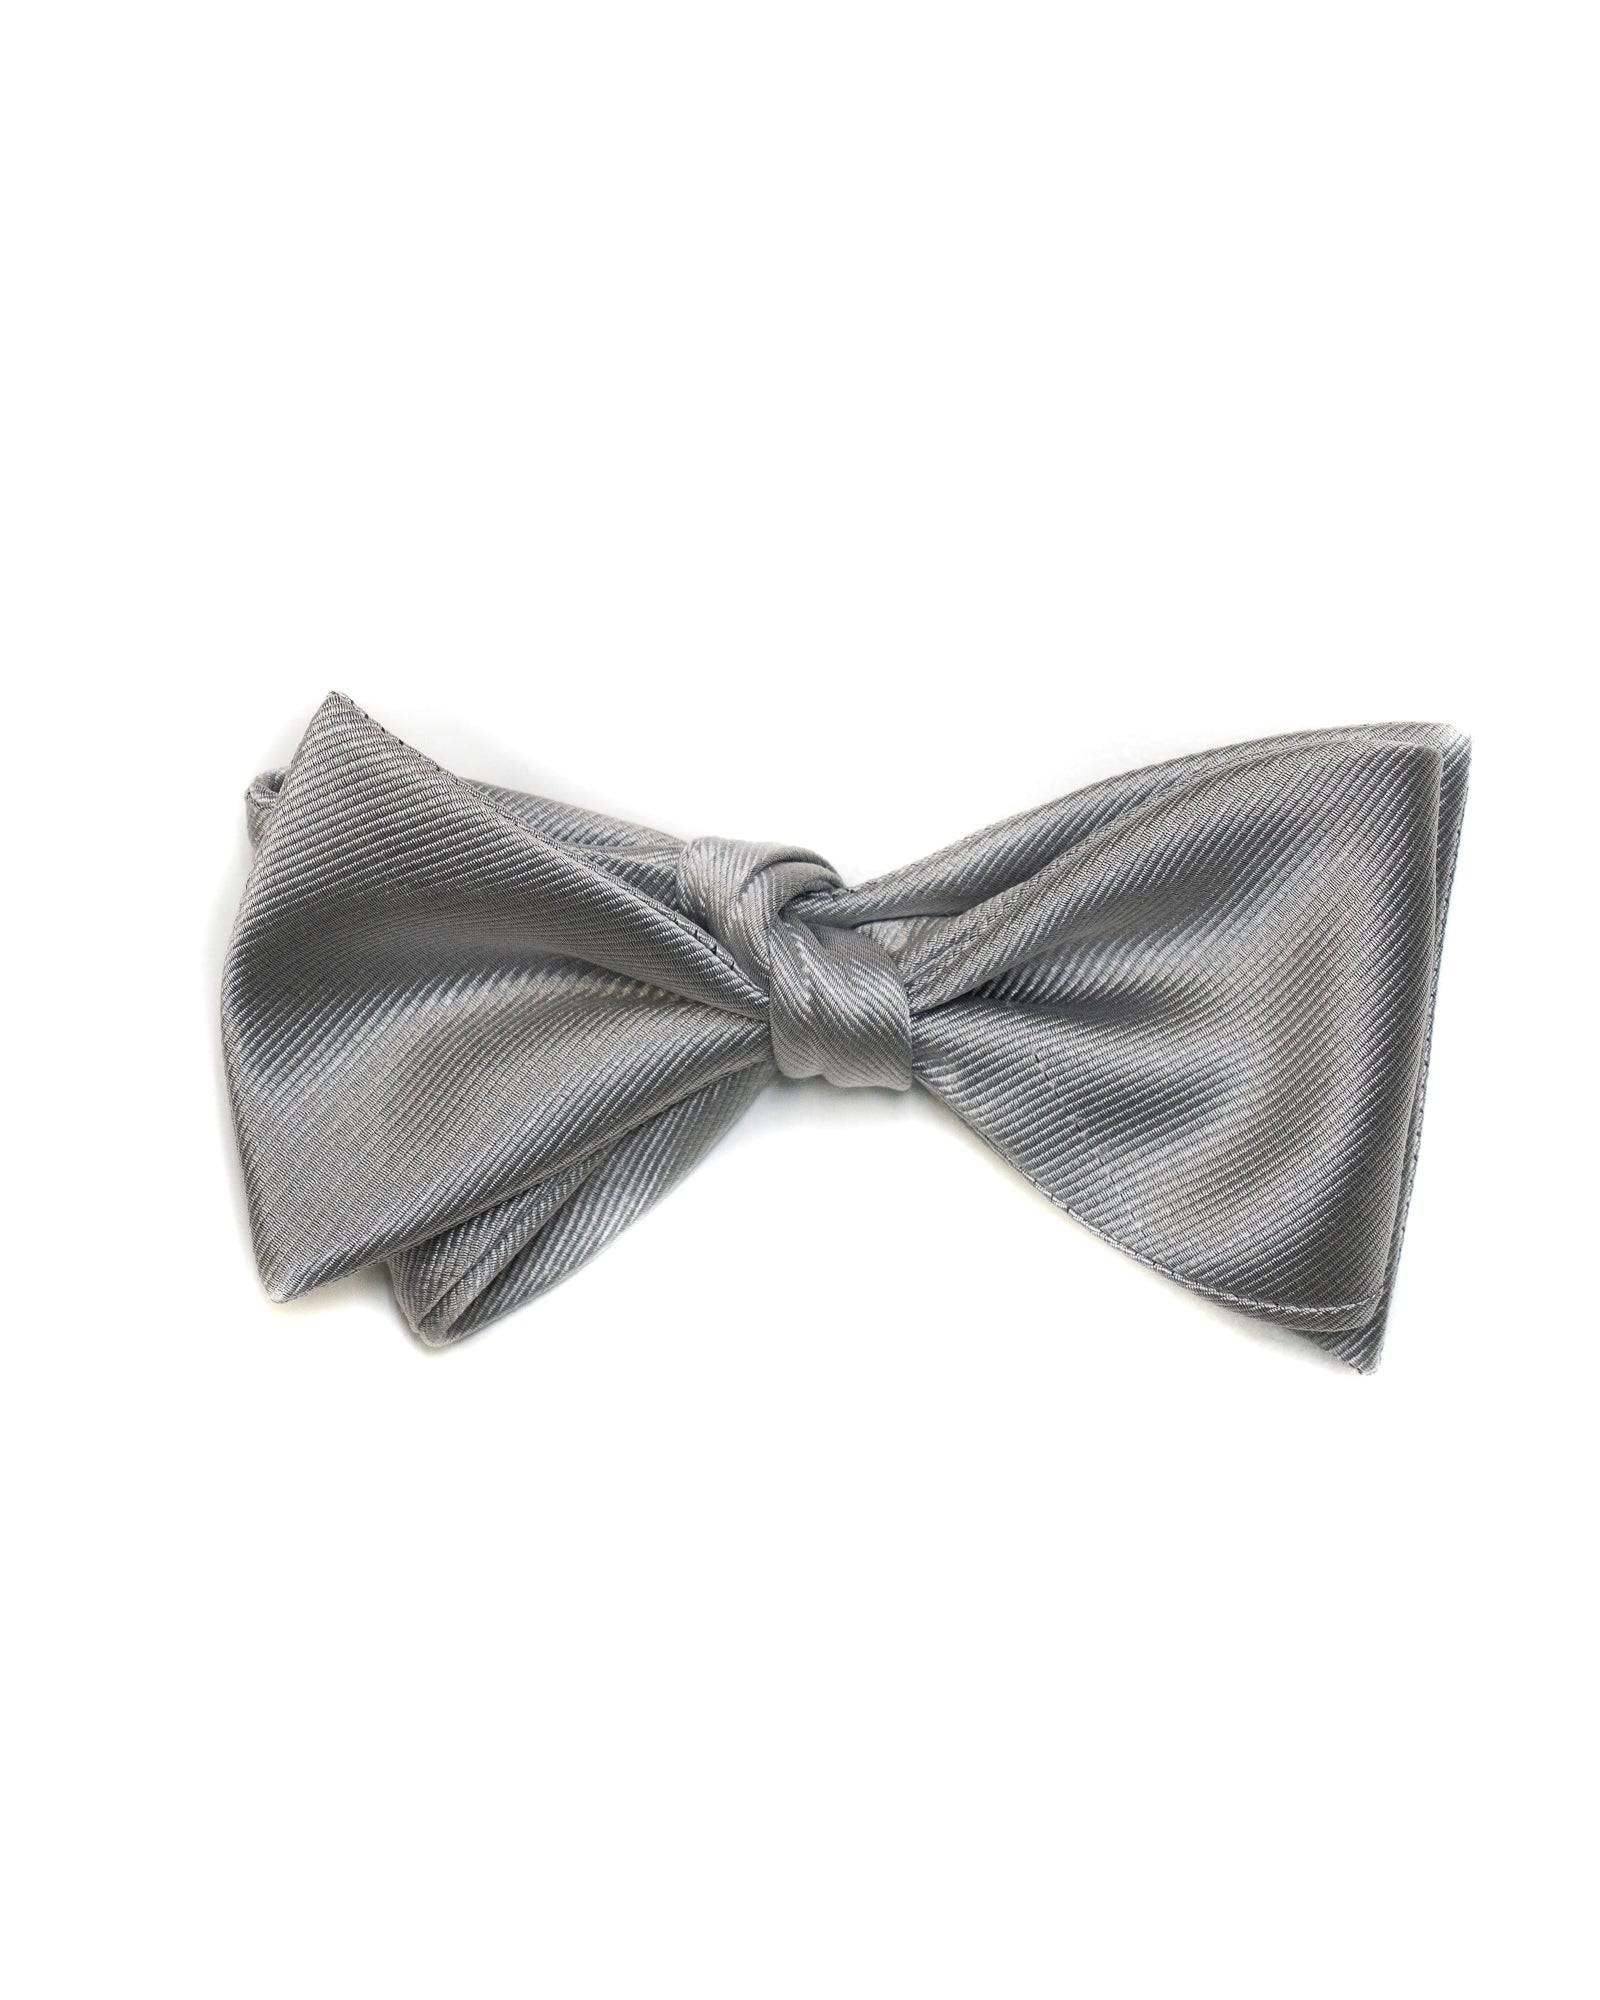 Self Tie All Silk Bow Tie In Silver Ribbed Solid - Rainwater's Men's Clothing and Tuxedo Rental